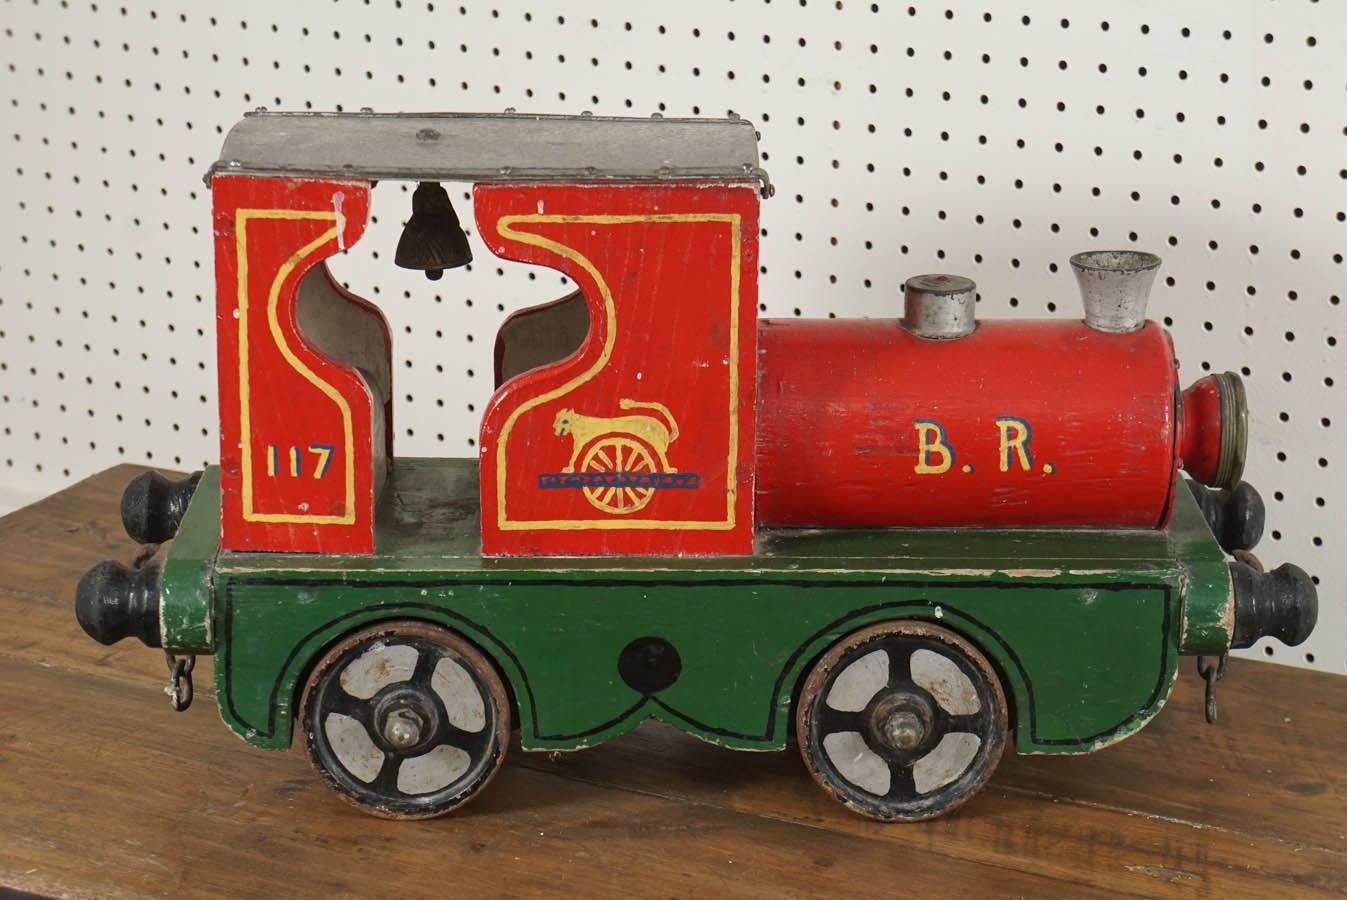 Painted porch has a very large collection of children's toys, particularly toy trains. This one is unique. It is a circus train, complete with a bell on the inside and everything is original. These toys are handmade and were likely put together by a